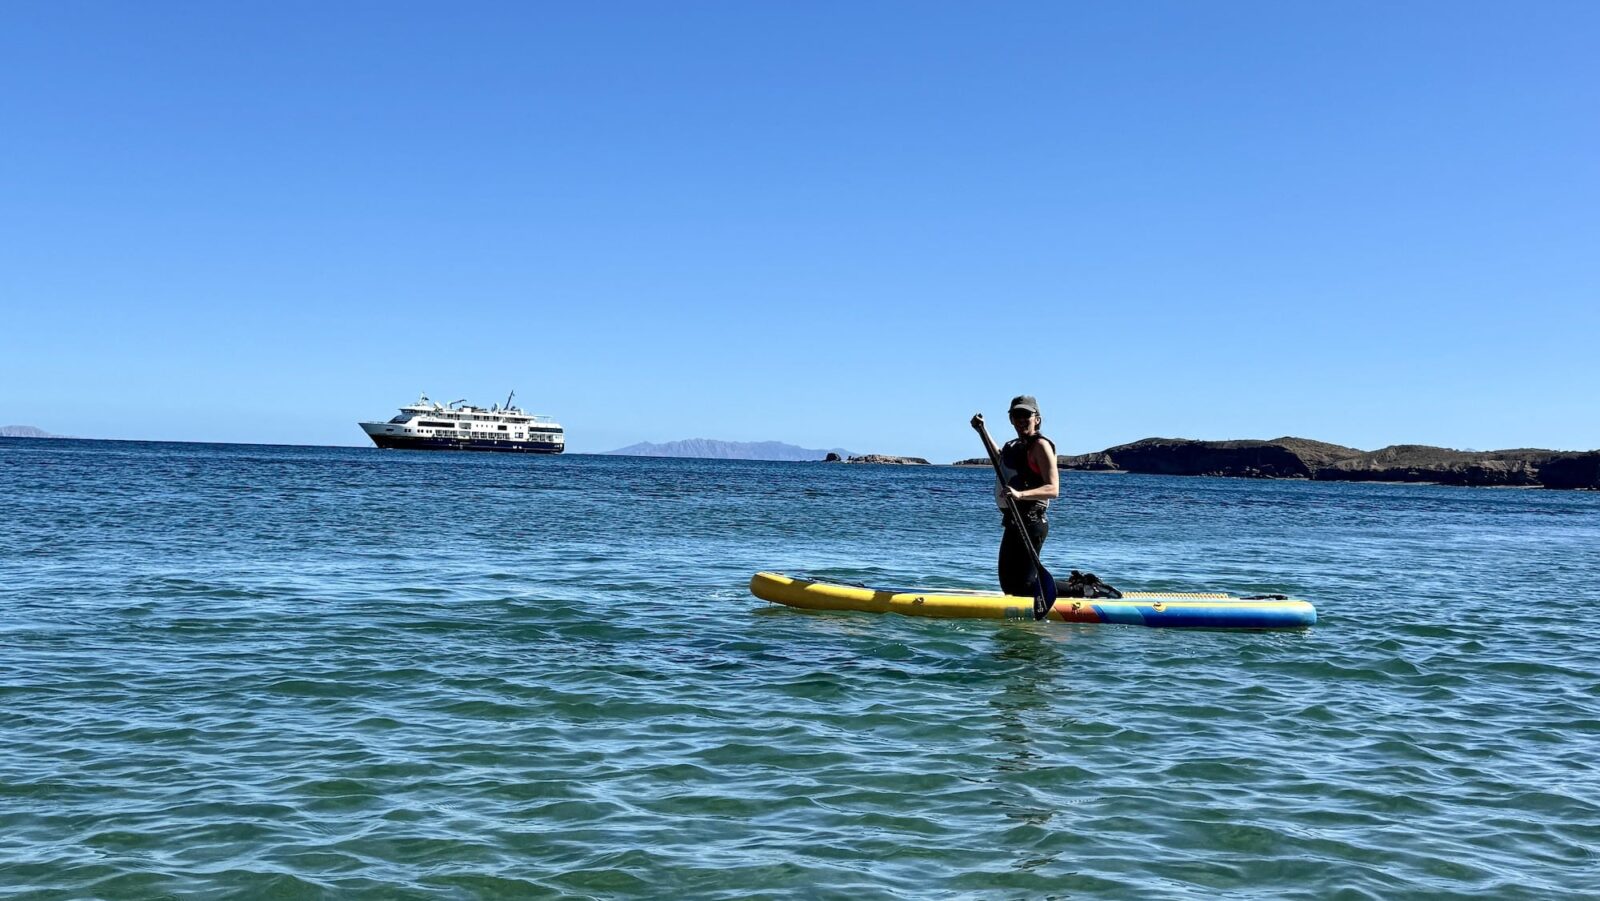 Person stand up paddleboarding with the National Geographic Venture in the background